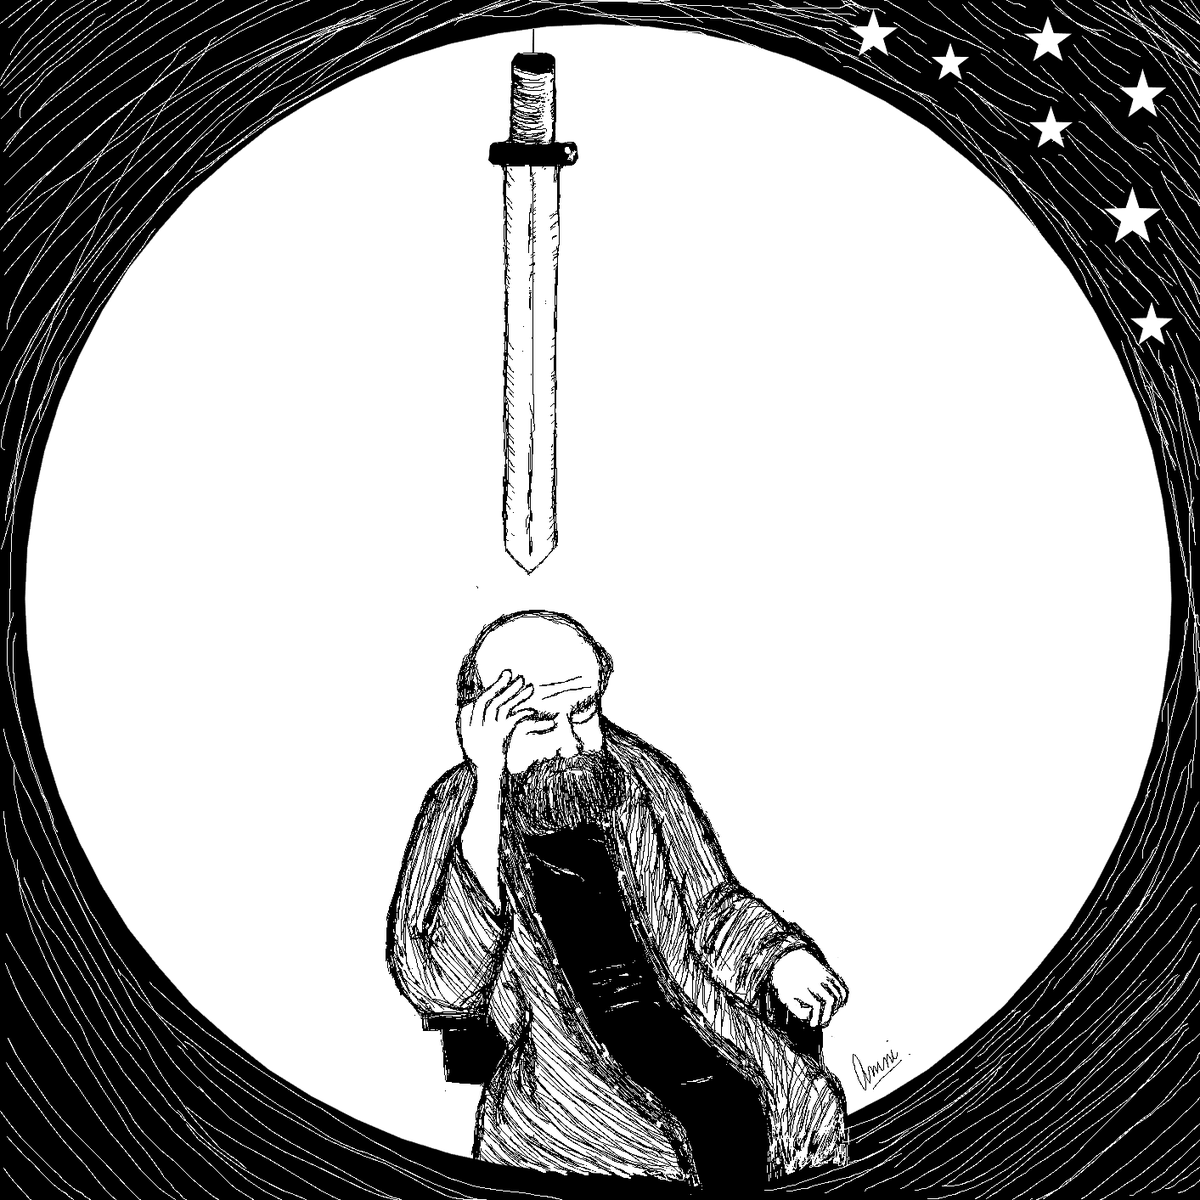 "Above, where seated in his tower I saw Conquest depicted in his powerThere was a sharpened sword above his headThat hung there by the thinnest simple thread"  #Inktober  #Inktober2019  #Brexit  #Damocles  #ancient